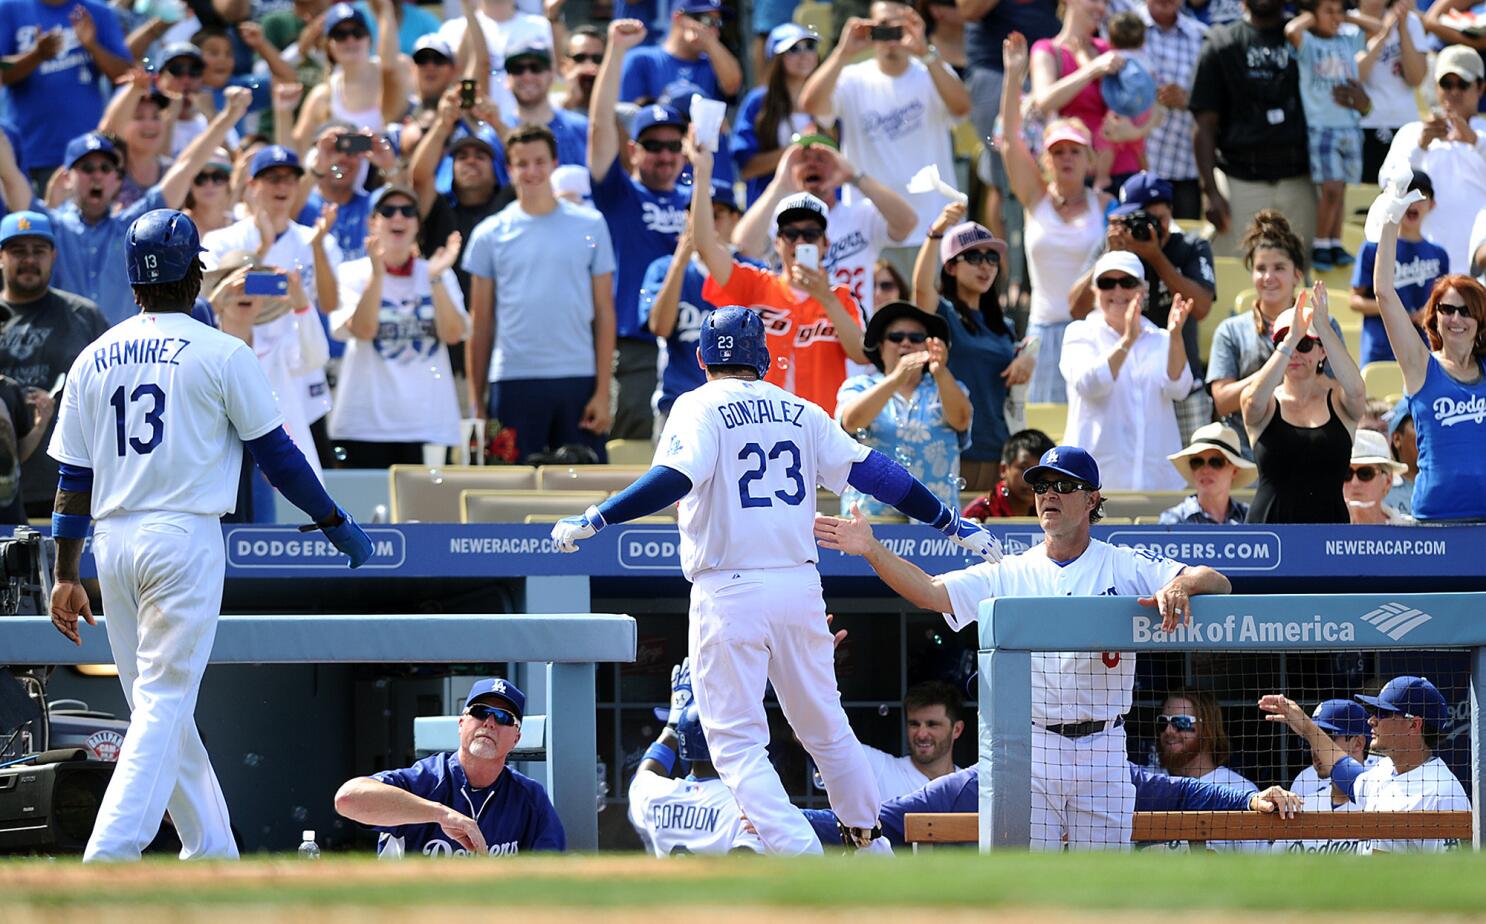 Los Angeles Dodgers on the Forbes MLB Team Valuations List